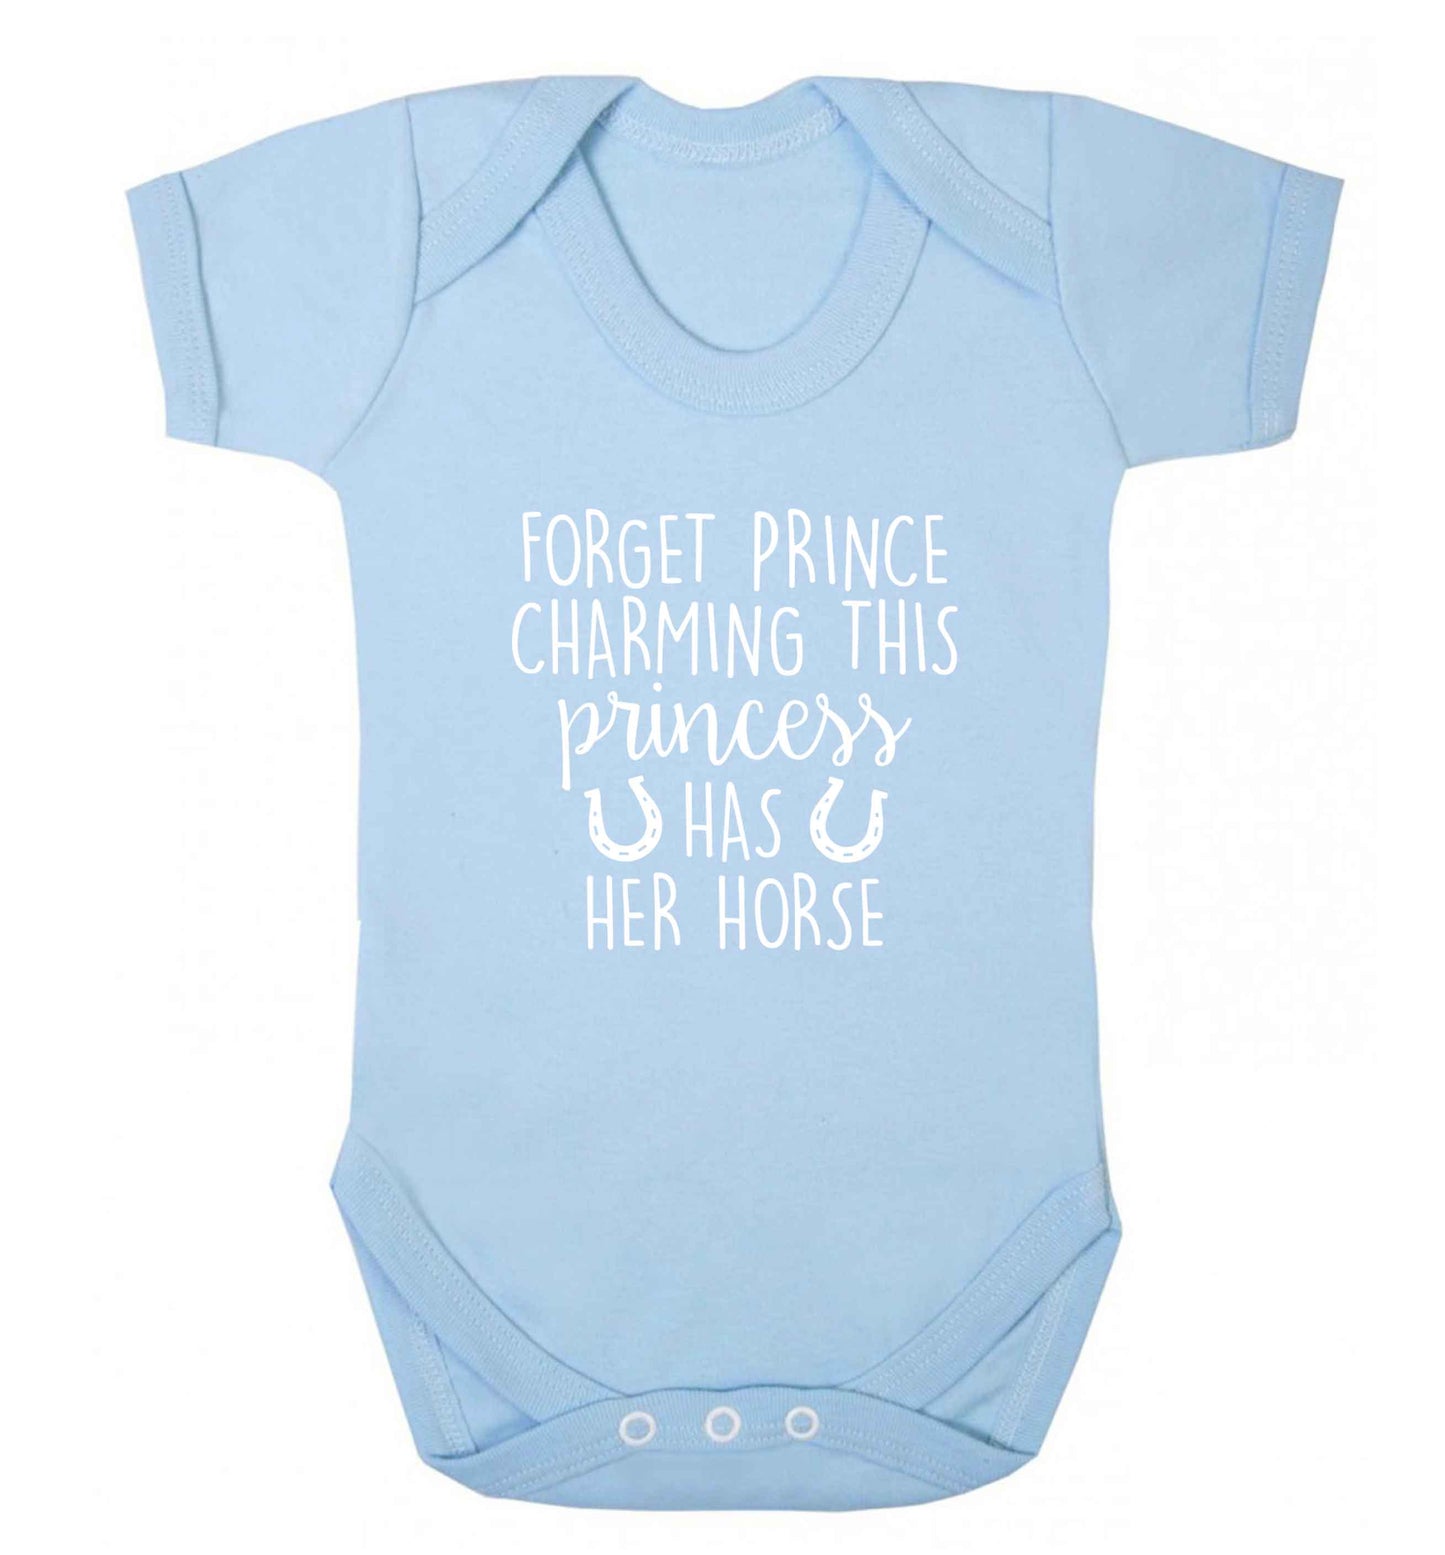 Forget prince charming this princess has her horse baby vest pale blue 18-24 months